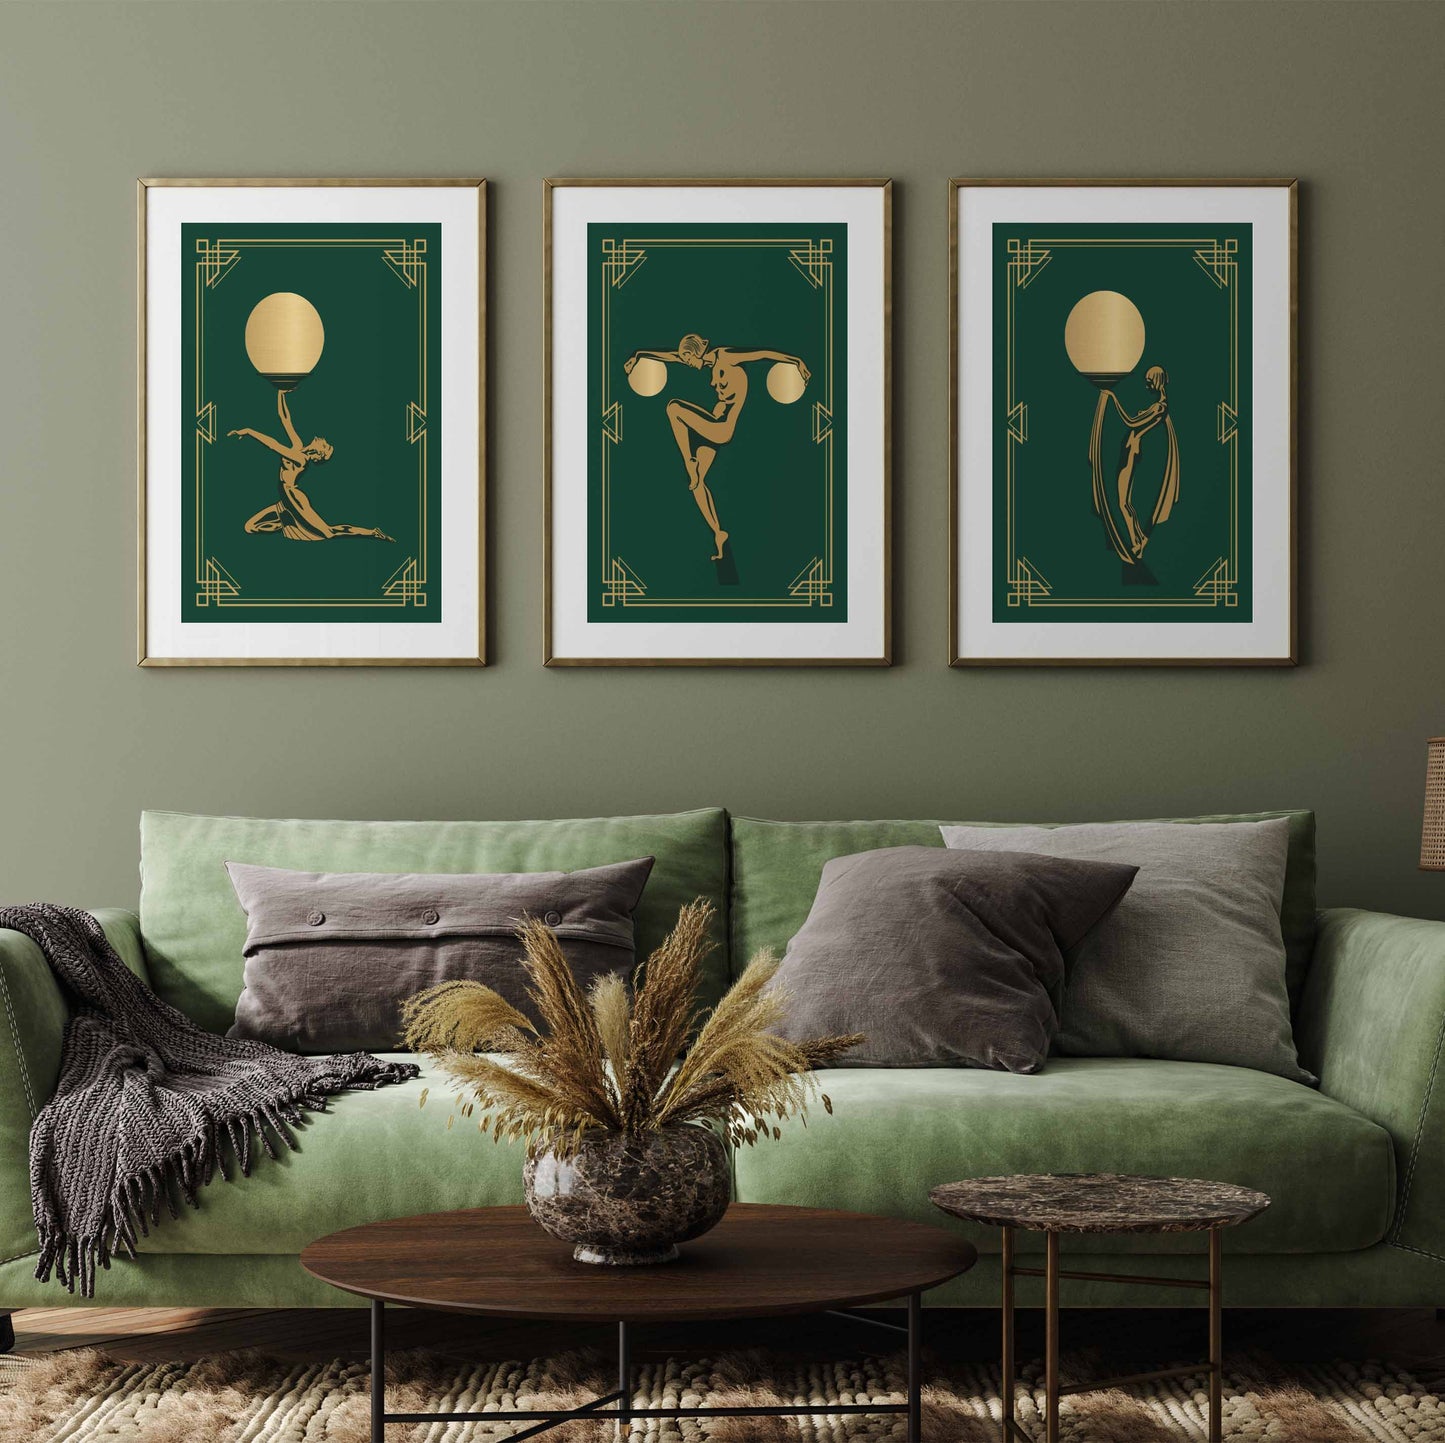 Set of 3 art deco wall art prints in green and gold